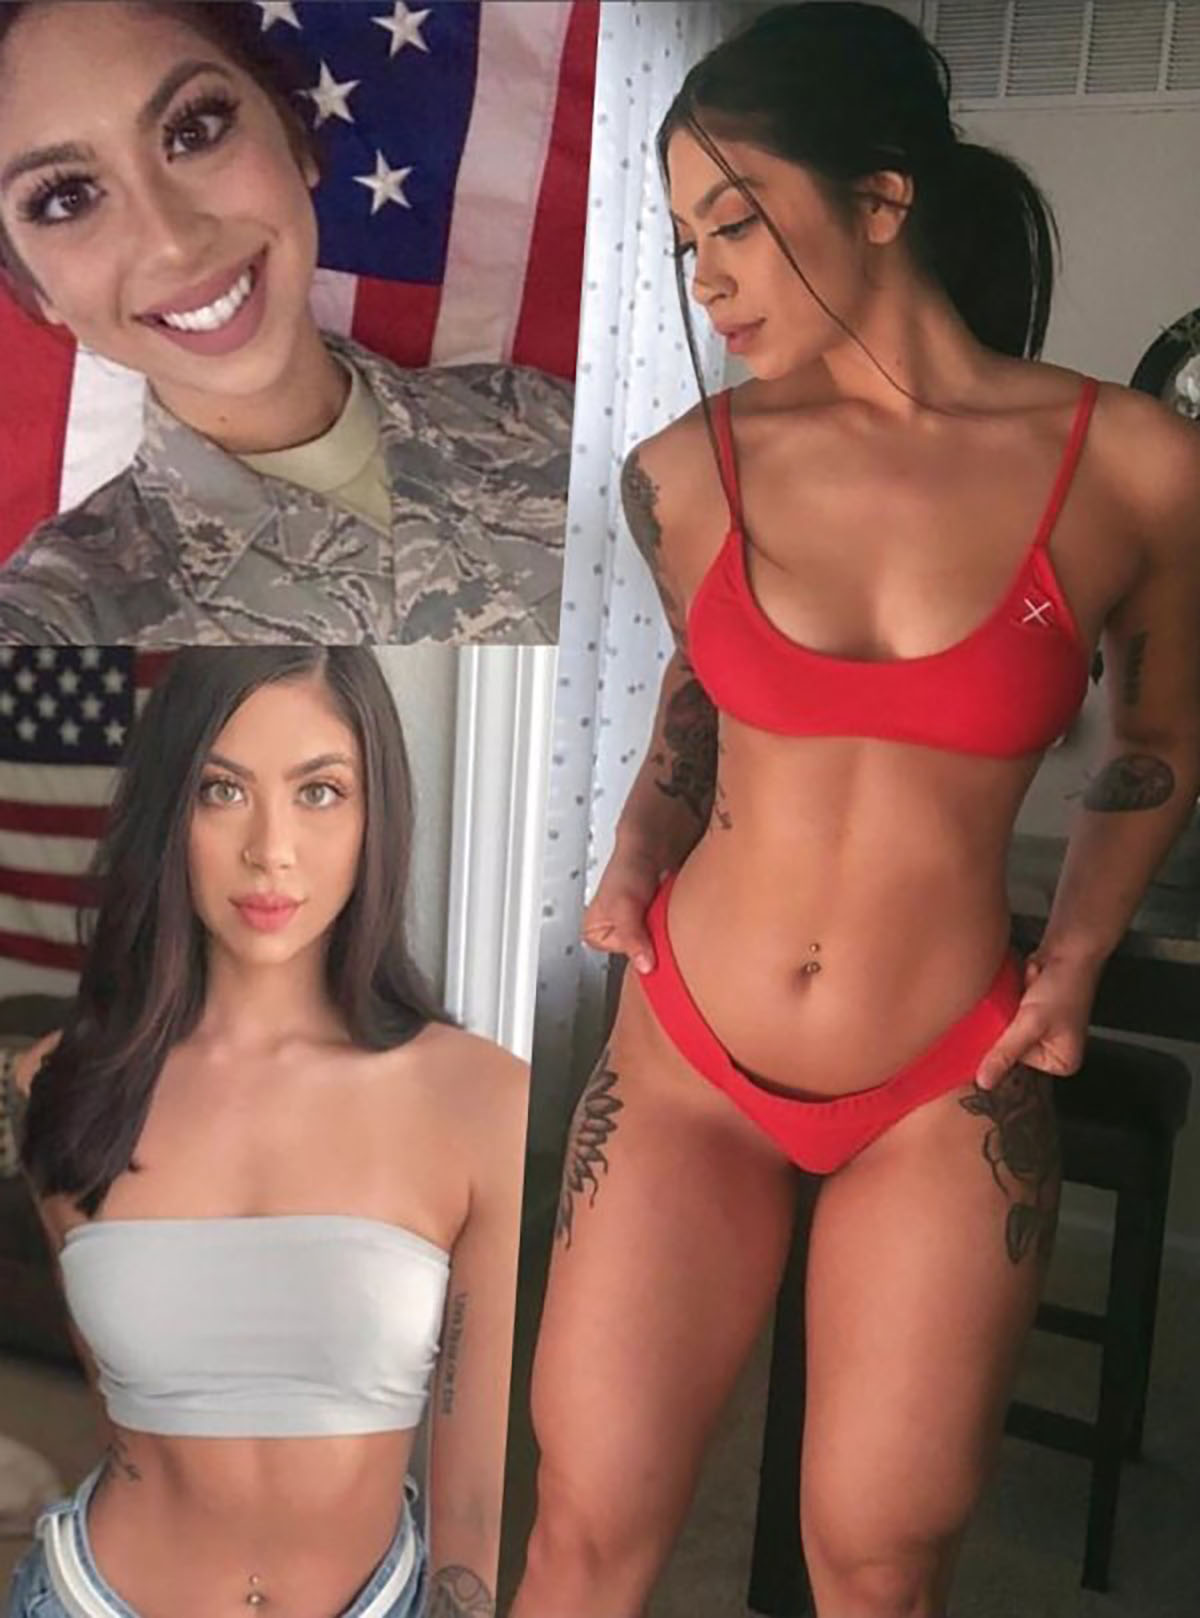 Look at The Military Girl of America